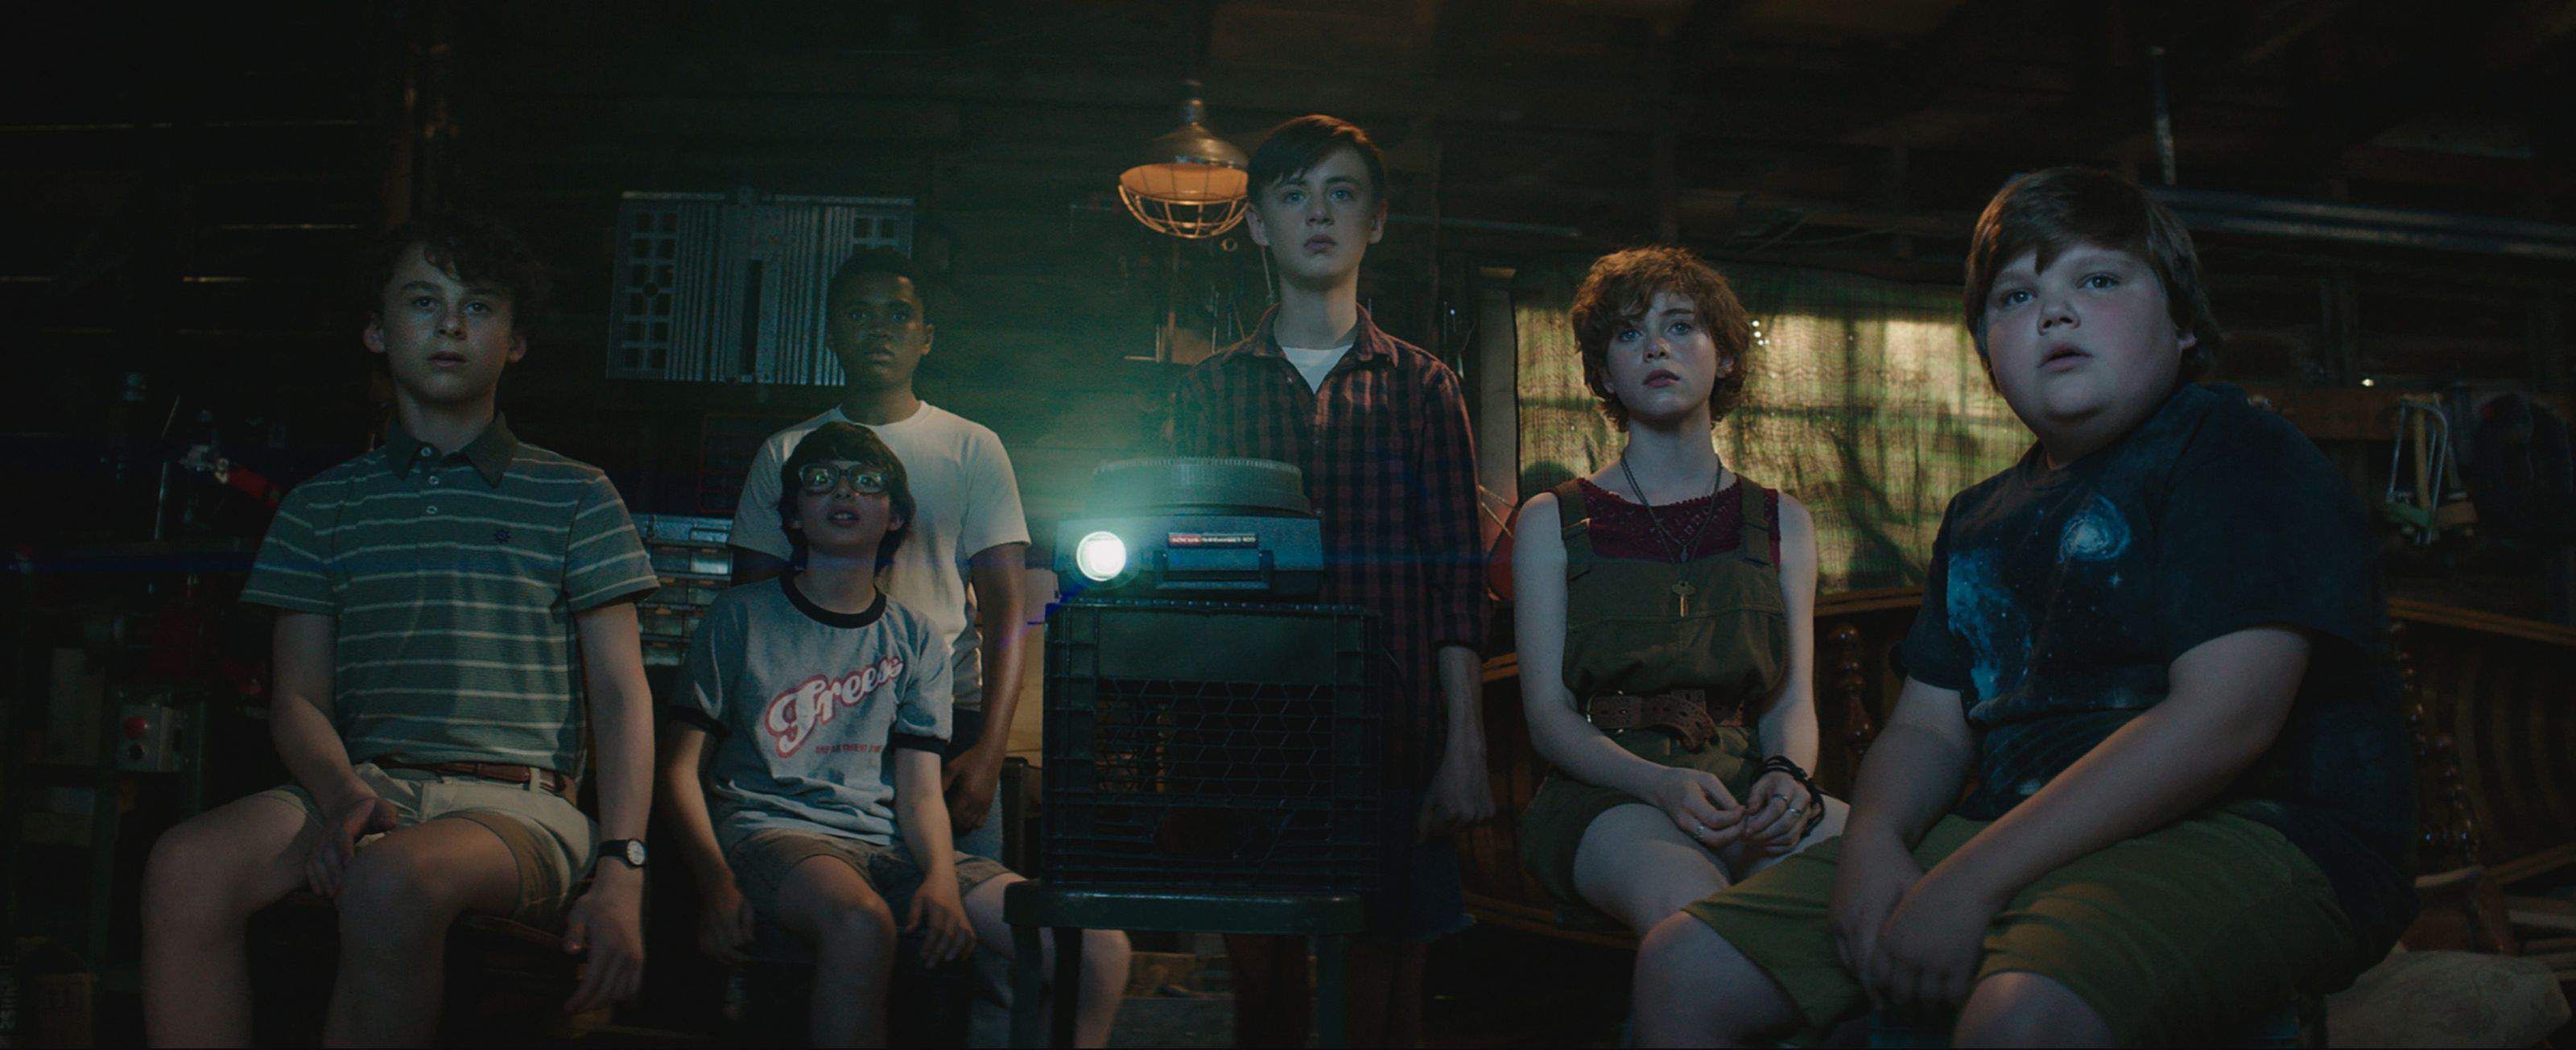 IT star confirms that Losers' Club kid actors will be back to battle  Pennywise in the sequel